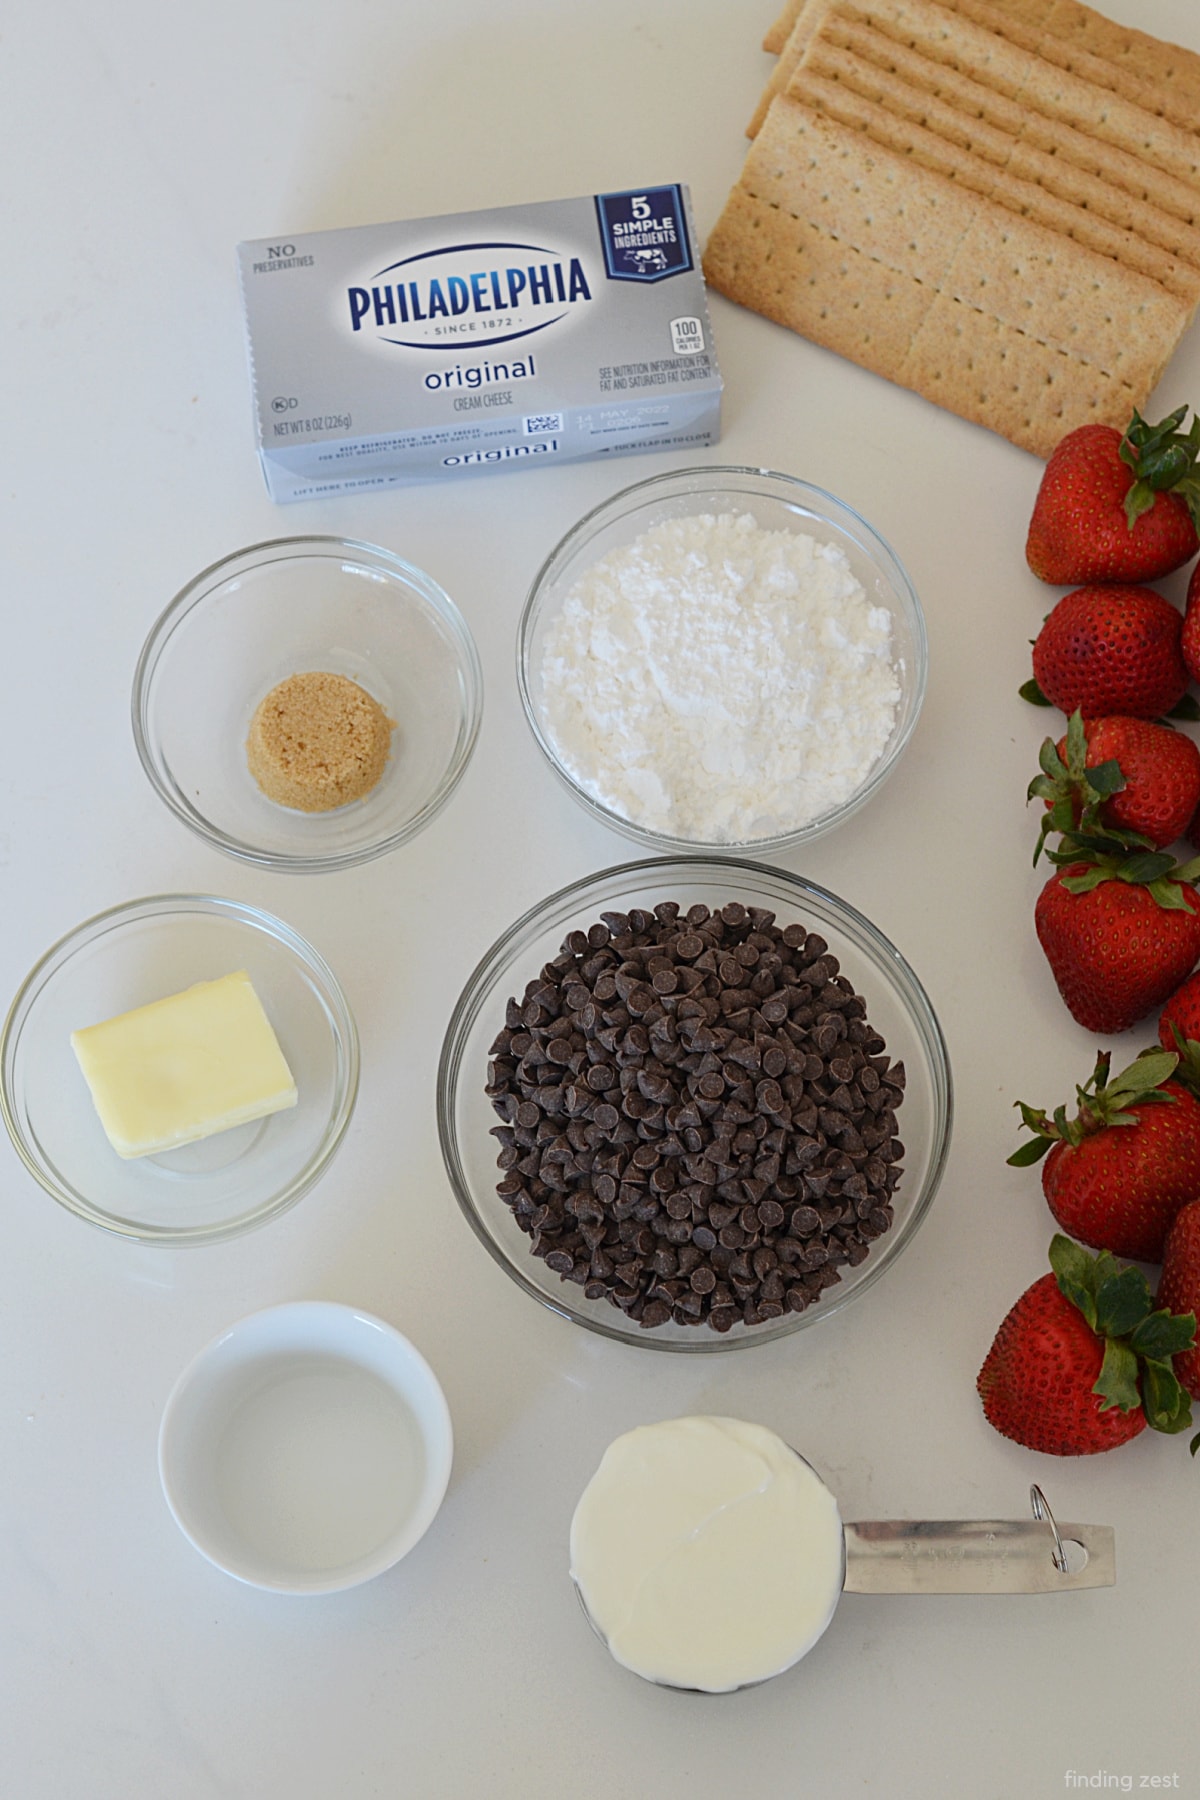 Ingredients for cream cheese dip